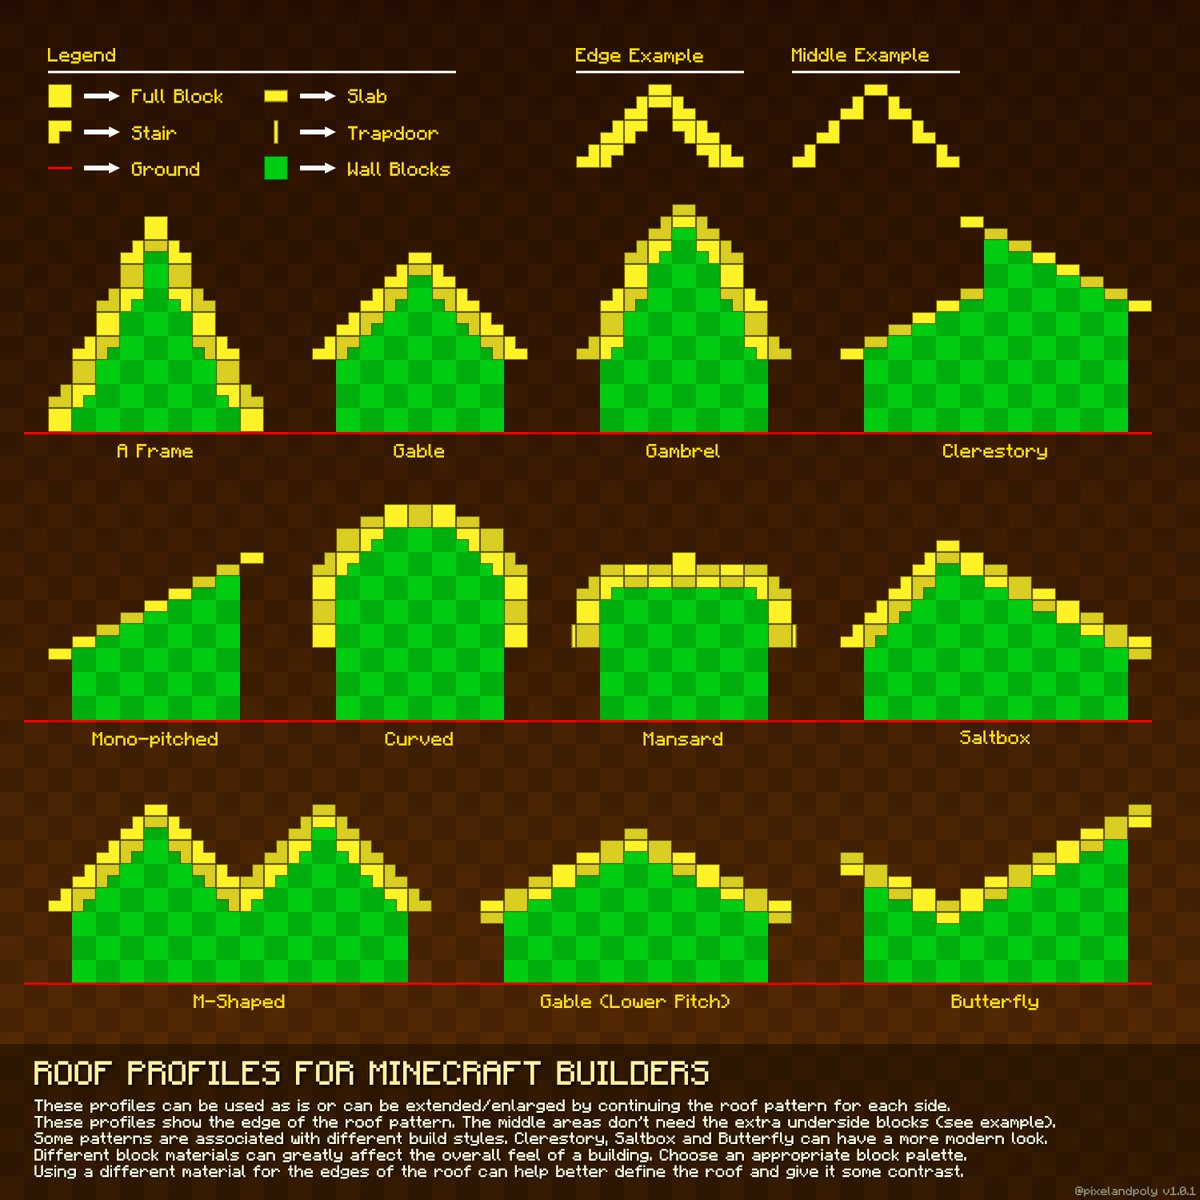 Hope everyone has a great day today! Here's the 2nd #Minecraft guide that I created. Hope this can help people with their builds a little. 11 different roof profiles to get you started!